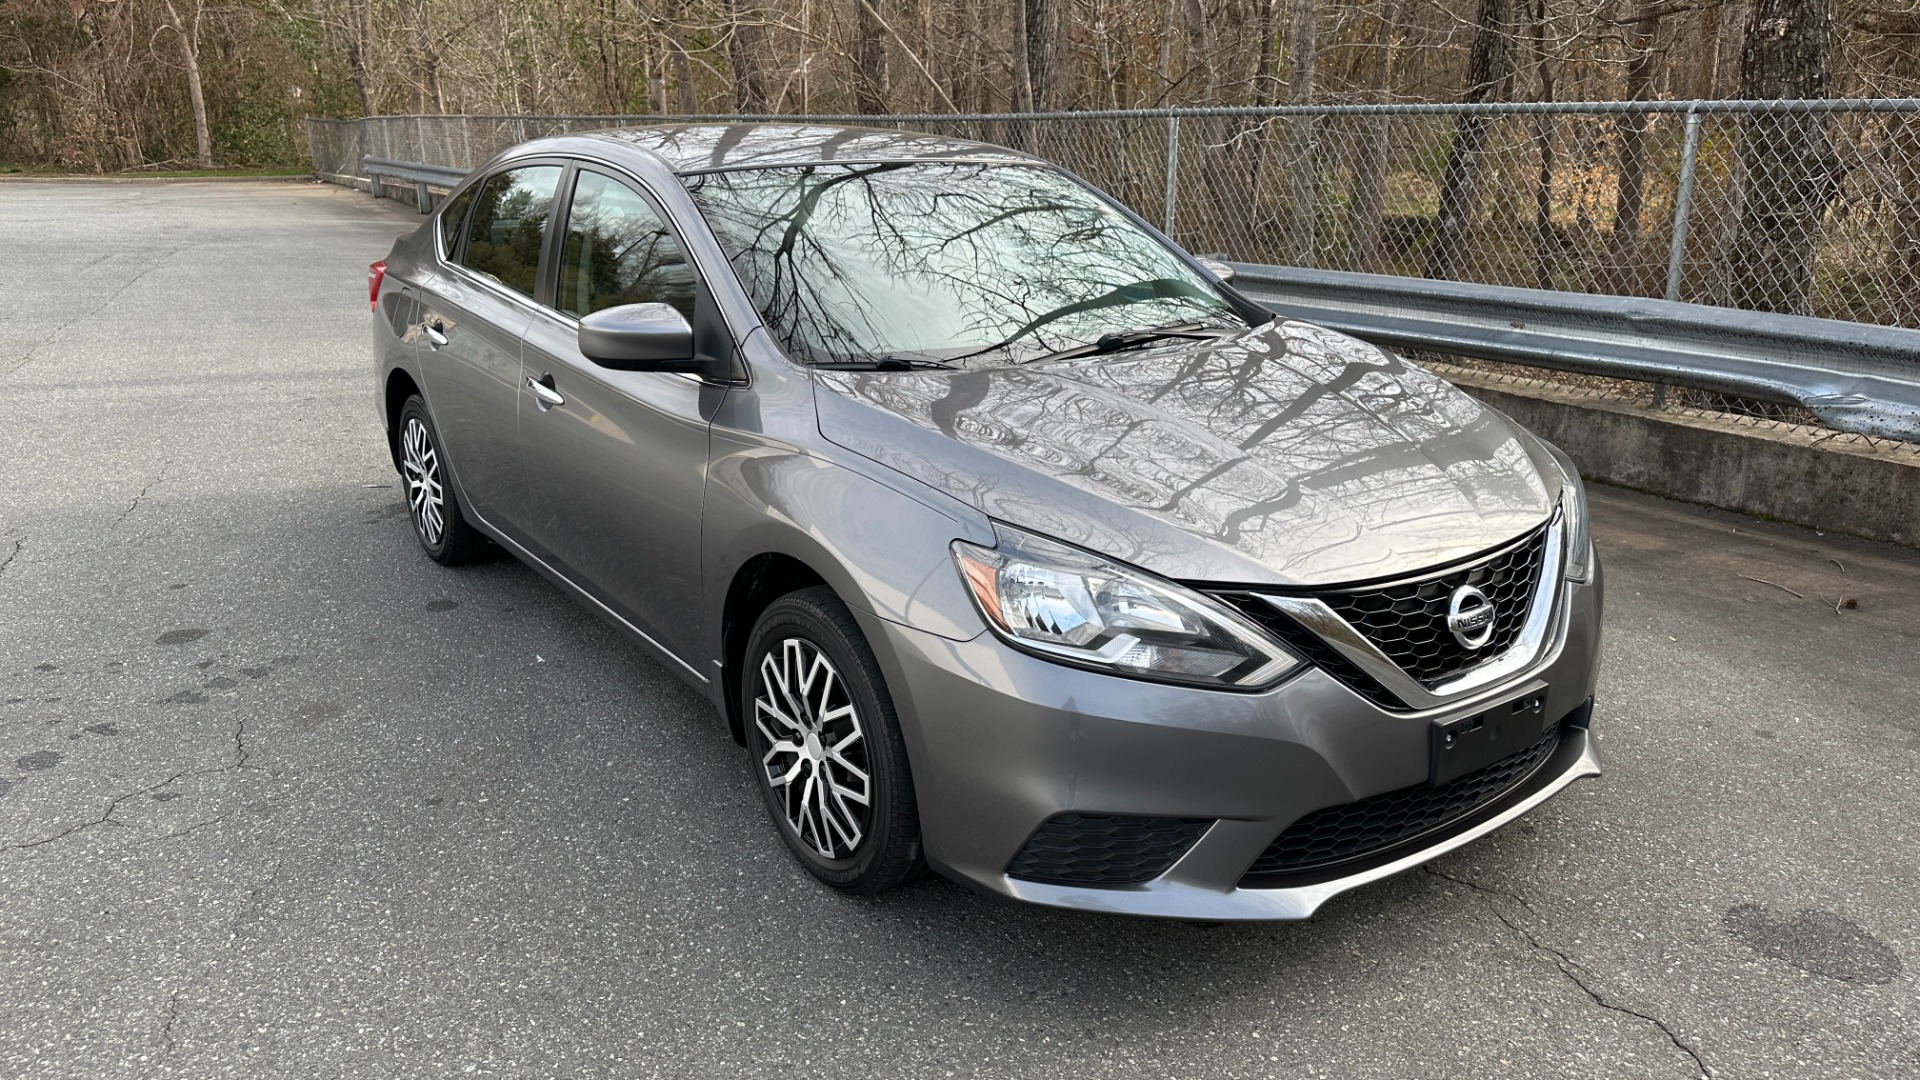 Used 2017 Nissan Sentra S / FRONT WHEEL DRIVE / SPLASH GUARDS / 4CYL ENGINE for sale Sold at Formula Imports in Charlotte NC 28227 4